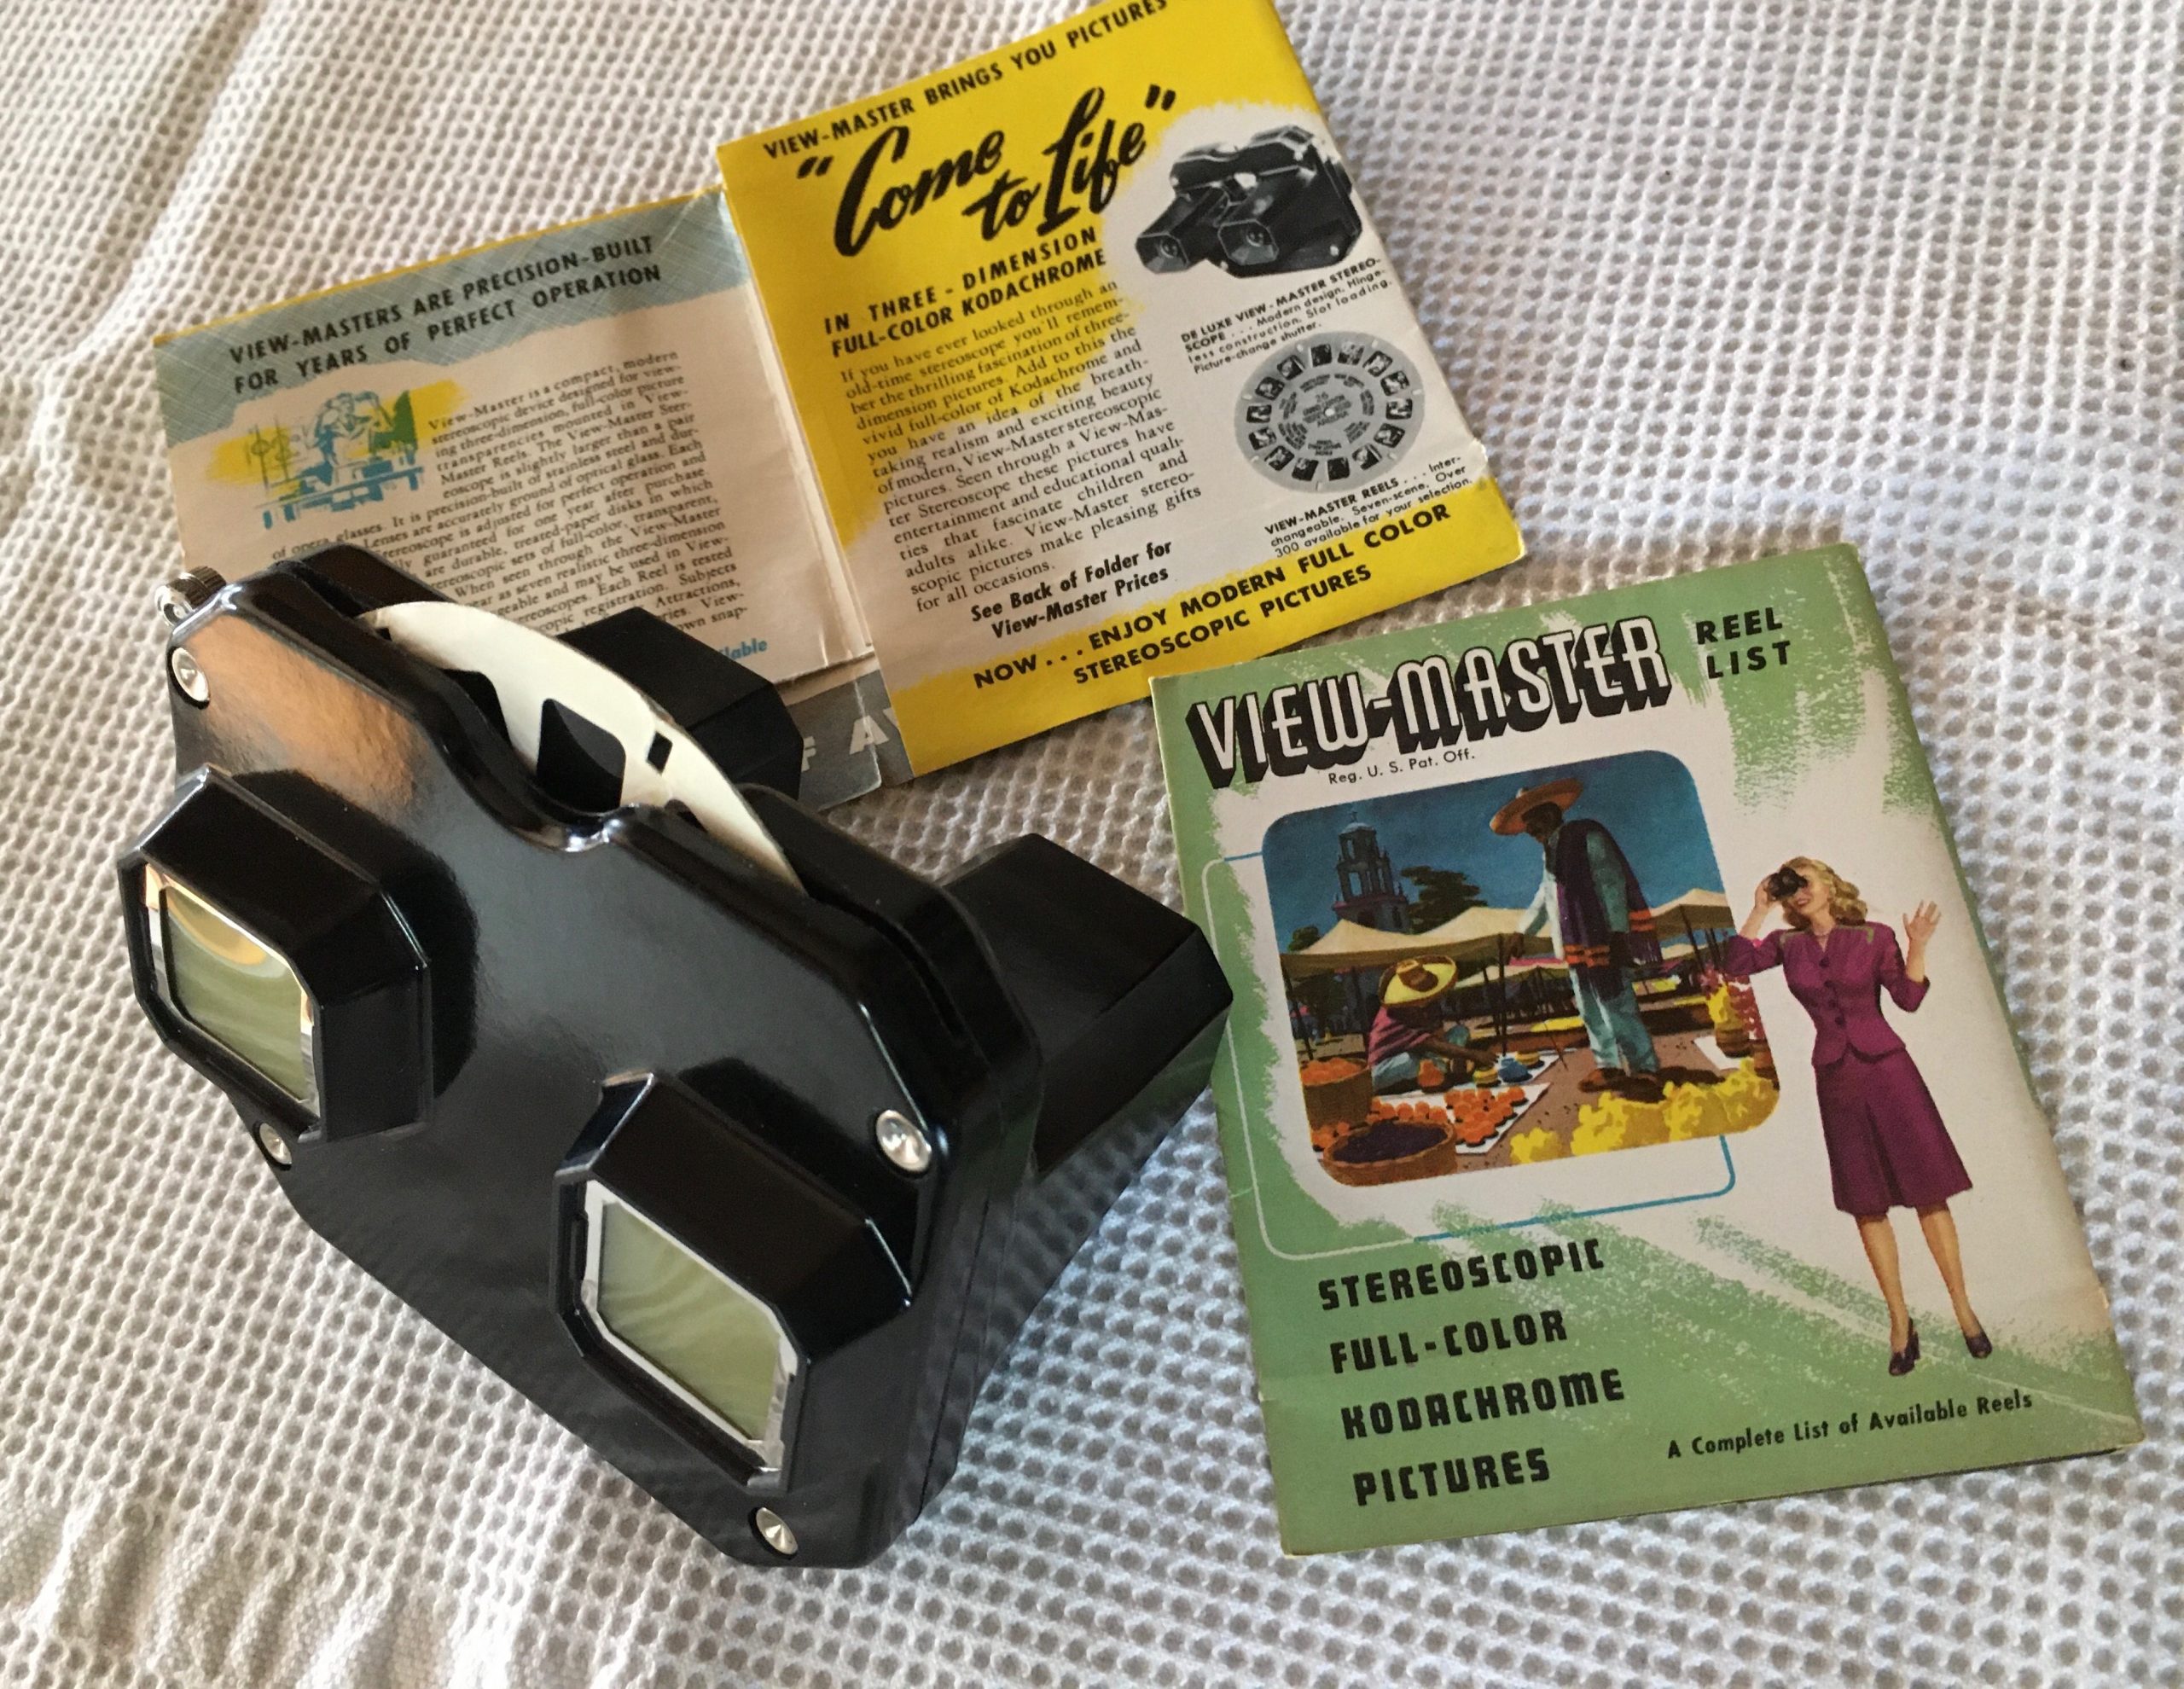 View-Master (1939). When the Sawyer's company of Portland, Oregon first  introduced the View-Master, it was meant to be an updated version of the  Victorian stereoscope and was presented to the public as